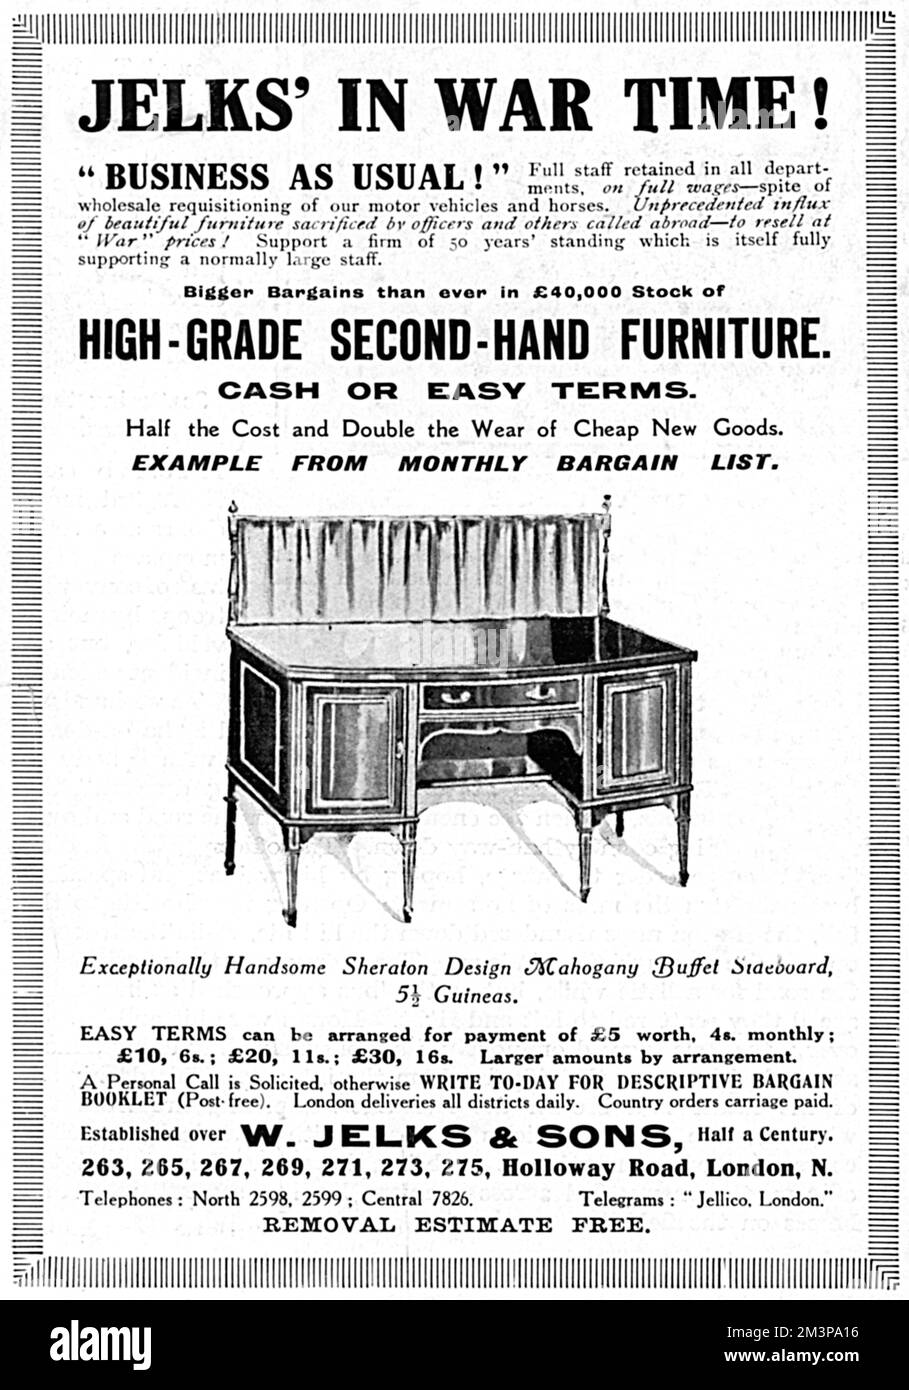 Advertisement for Jelk's, W. Jelks &amp; Sons of Holloway Road, London, with fifty years experience in house removals and second hand furniture.  The advert, which appears in The Sketch magazine at the end of September 1914, proclaims its 'Business as Usual' approach in wartime, advising readers that it was retaining a full staff in all departments on full wages in spite of wholelsale requisitioning of horses and vehicles.  The advert also promotes the fact it has a unprecedented amount of furniture stock due to an influx of pieces from officers and others called abroad.  Pictured is a handsom Stock Photo